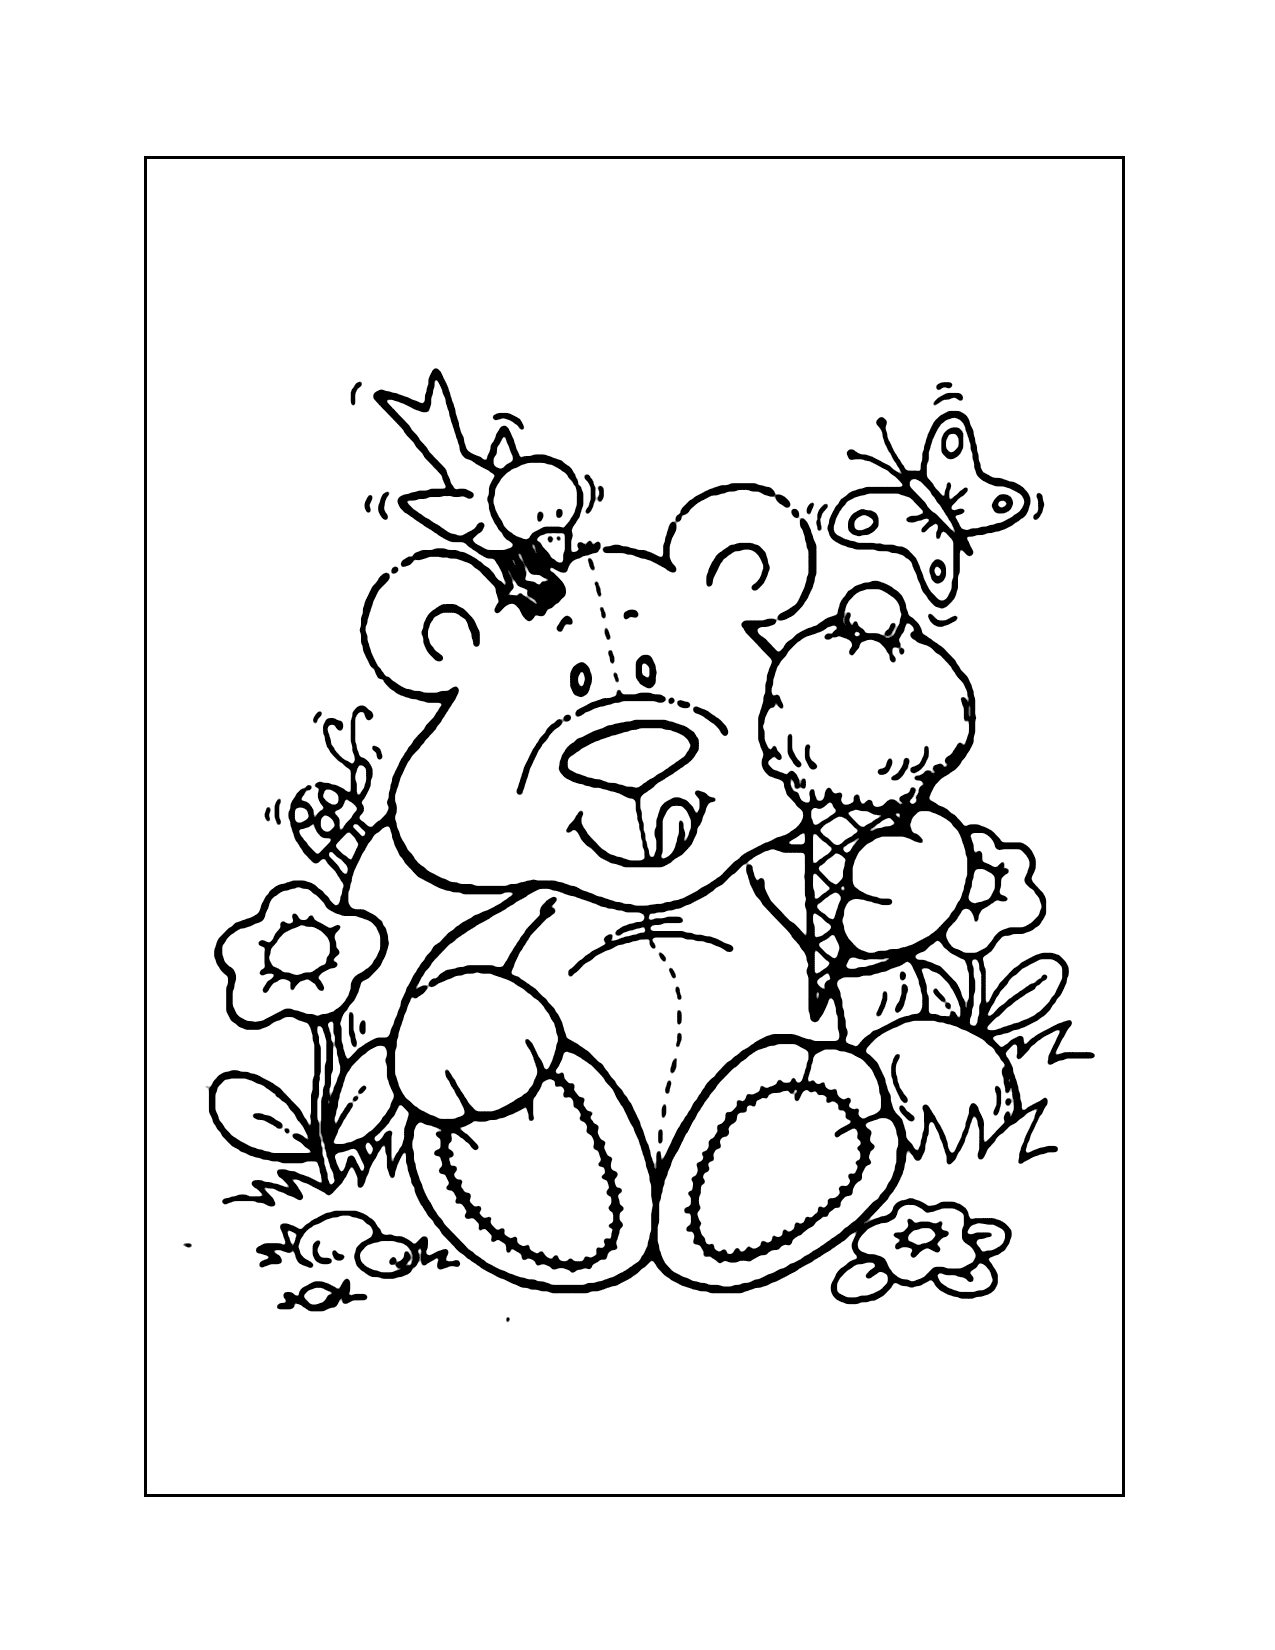 Teddy Bear Eating Ice Cream Coloring Page